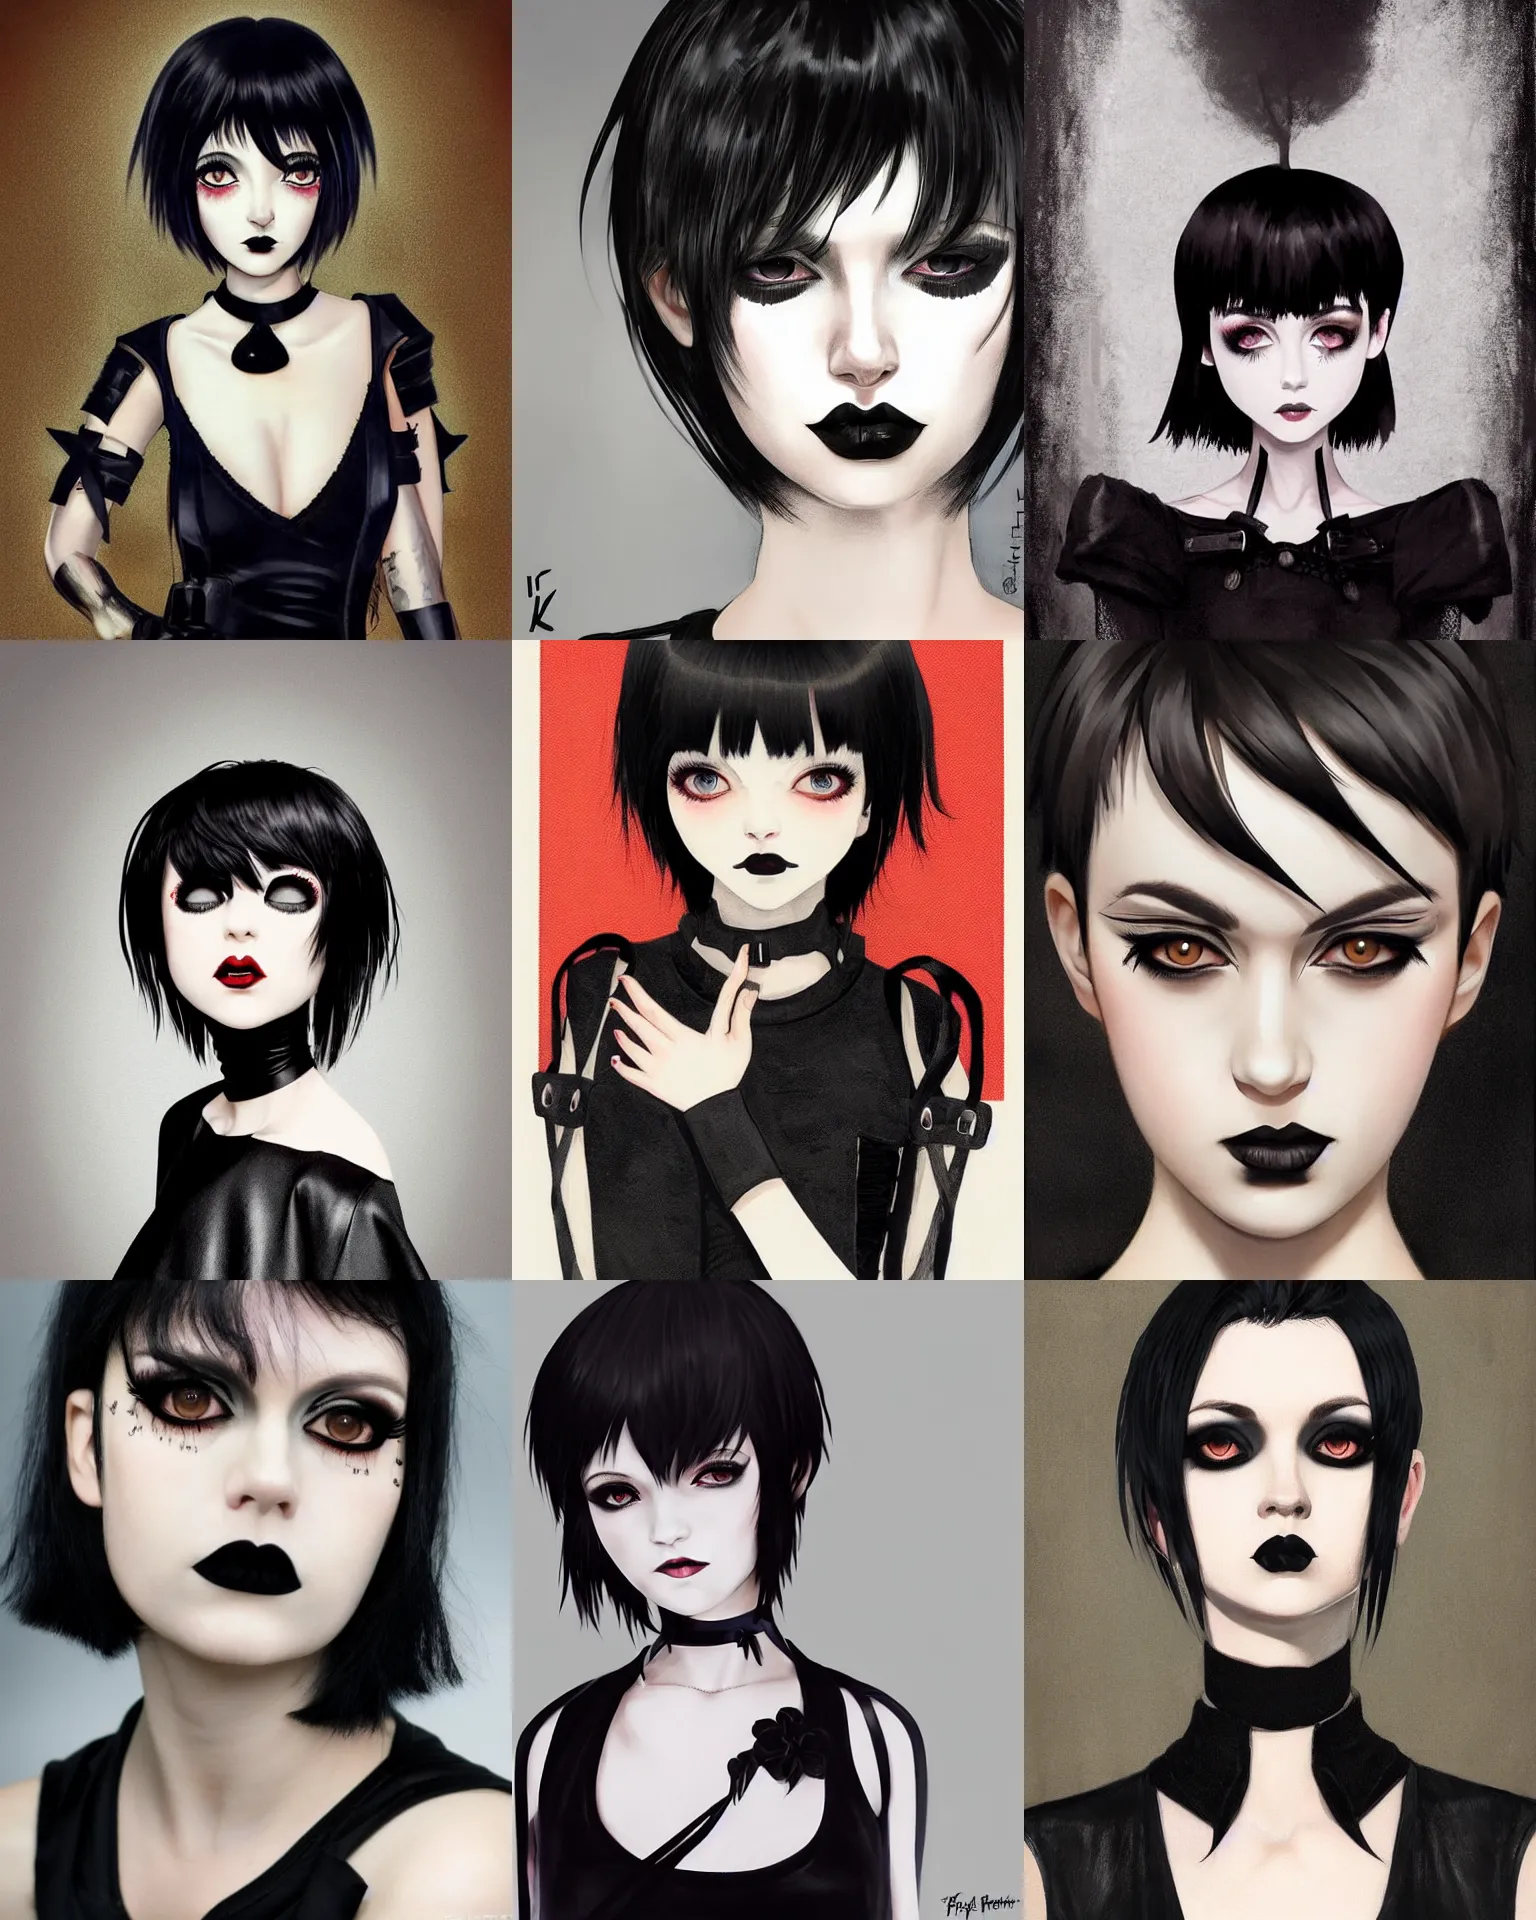 Prompt: A goth portrait by Ilya Kuvshinov. She is wearing black contact lenses. Her hair is dark brown and cut into a short, messy pixie cut. She has a slightly rounded face, with a pointed chin, large eyes, and a small nose. She is wearing a black tank top, a black leather jacket, a black knee-length skirt, a black choker, and black leather boots.